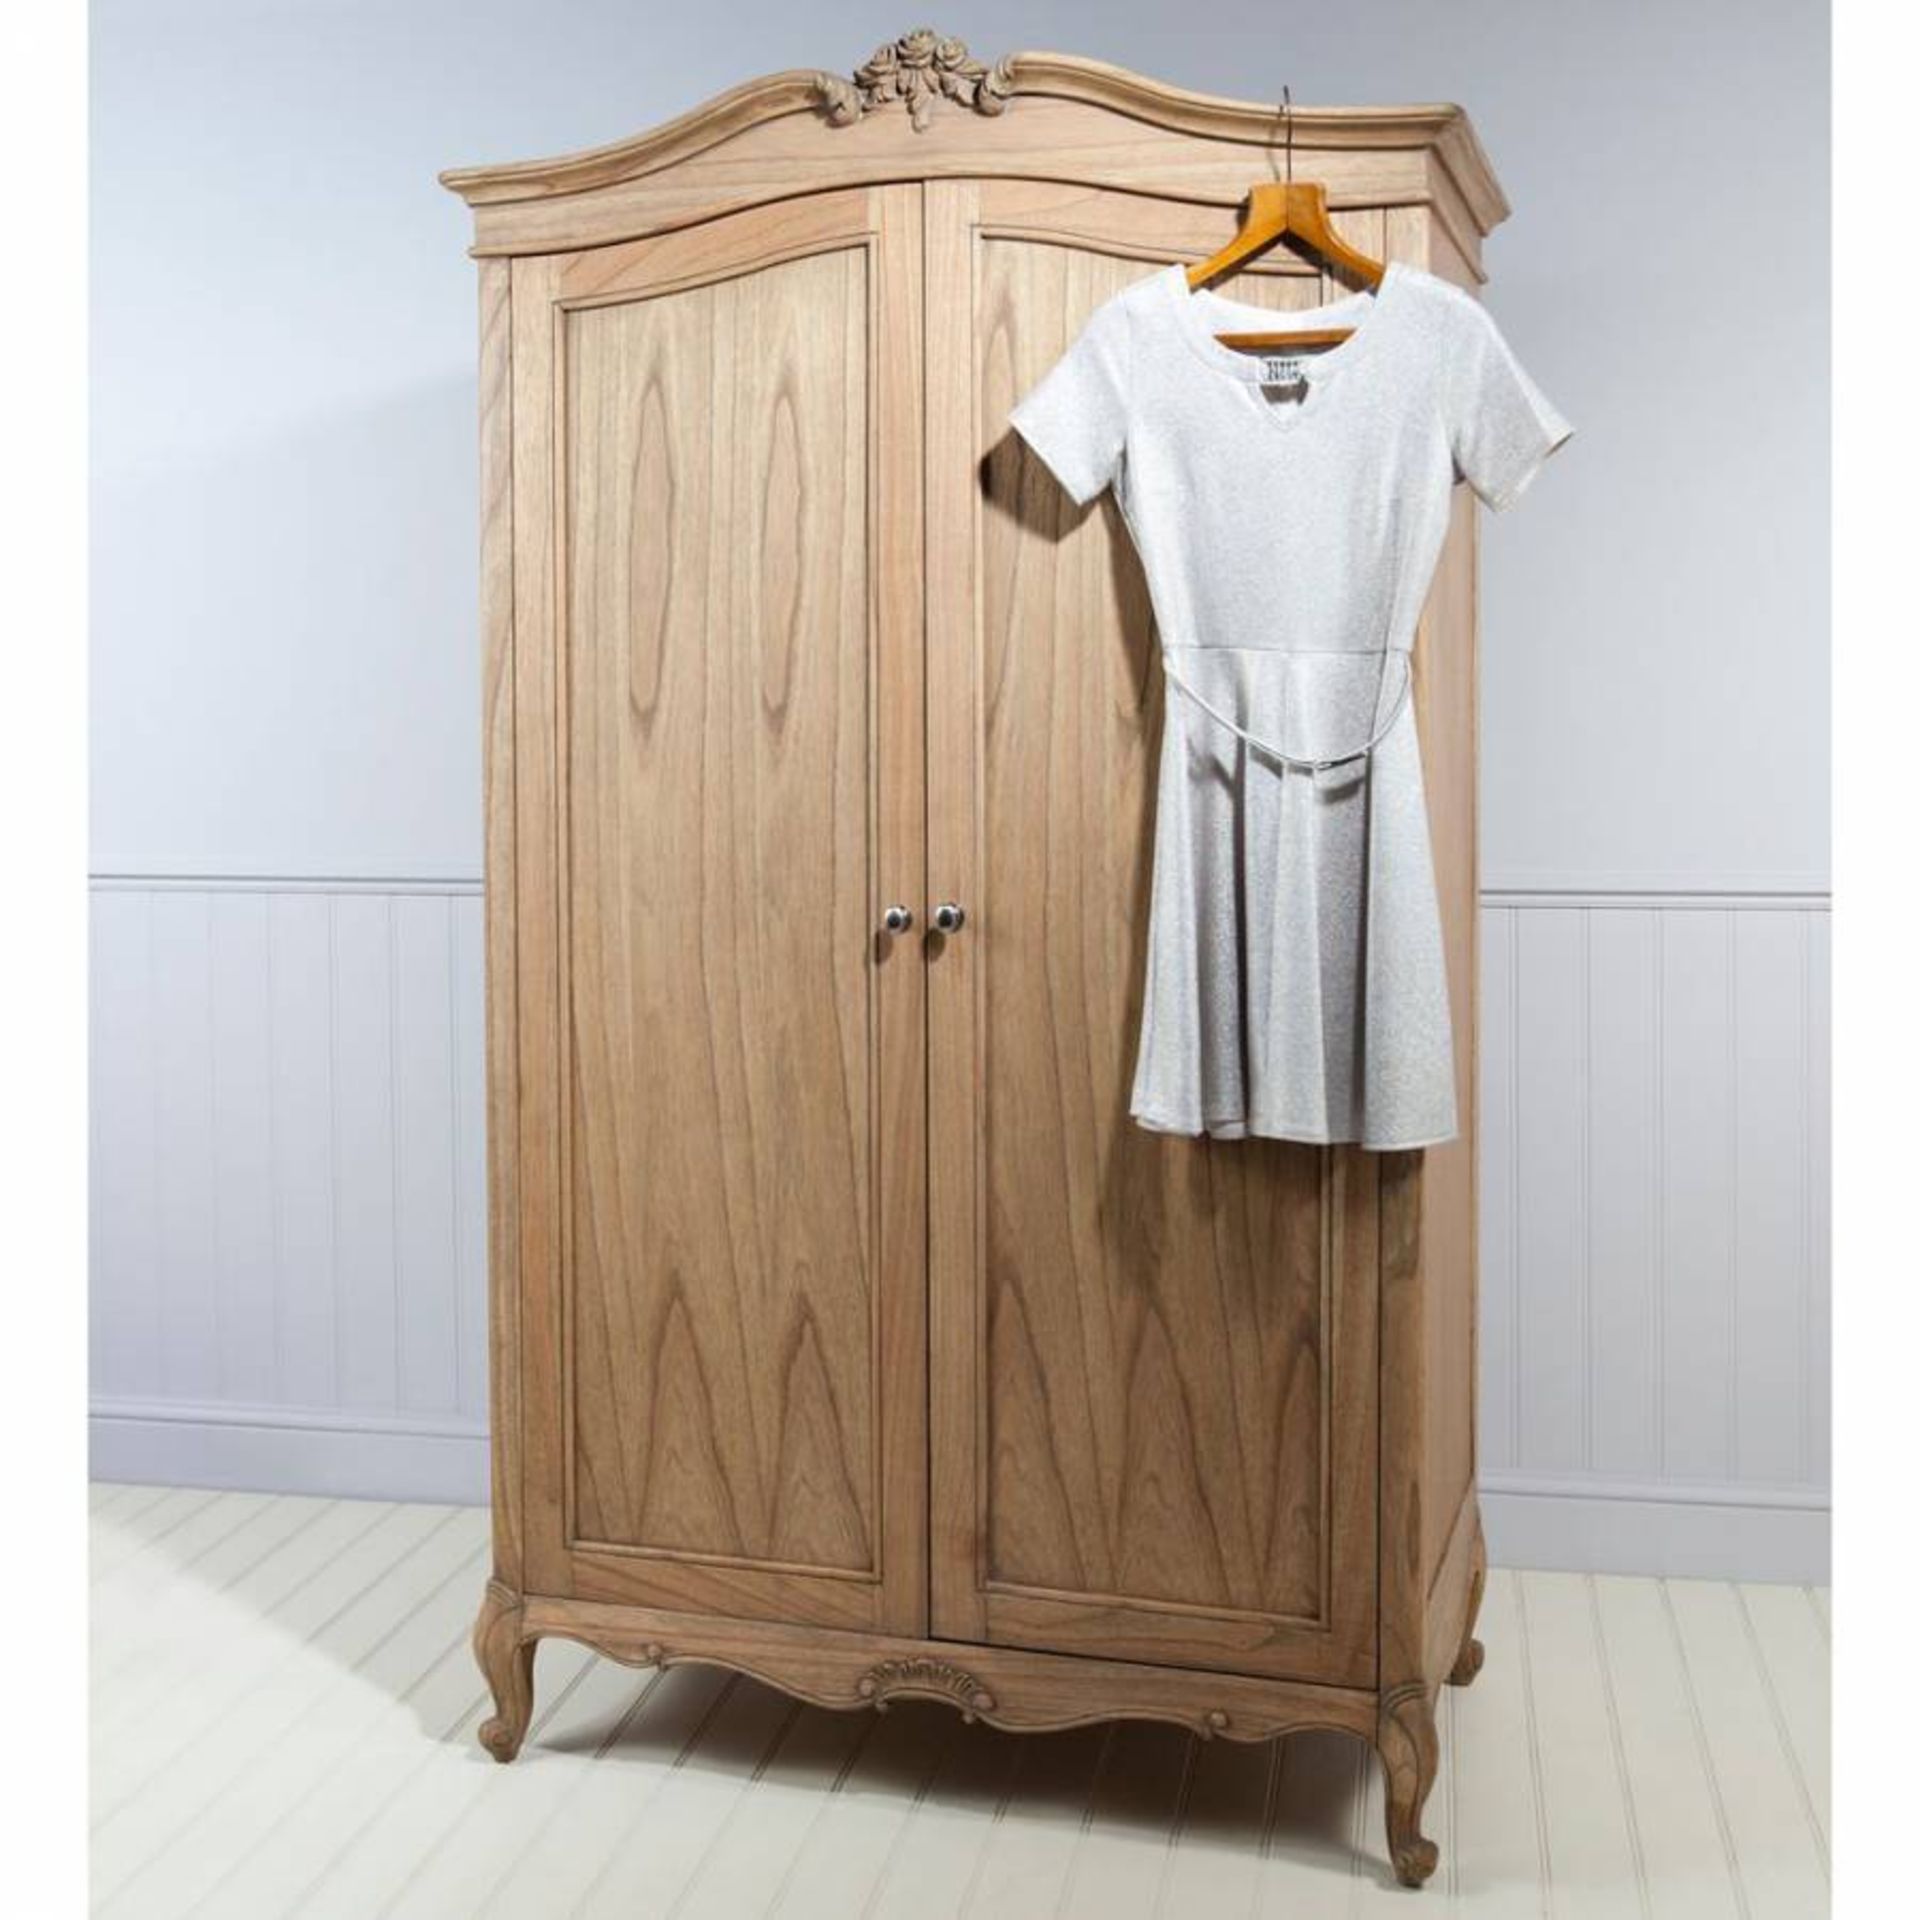 Chic 2 Door Wardrobe Weathered Handcrafted From Solid Mindi Ash Wood Traditionally Constructed.